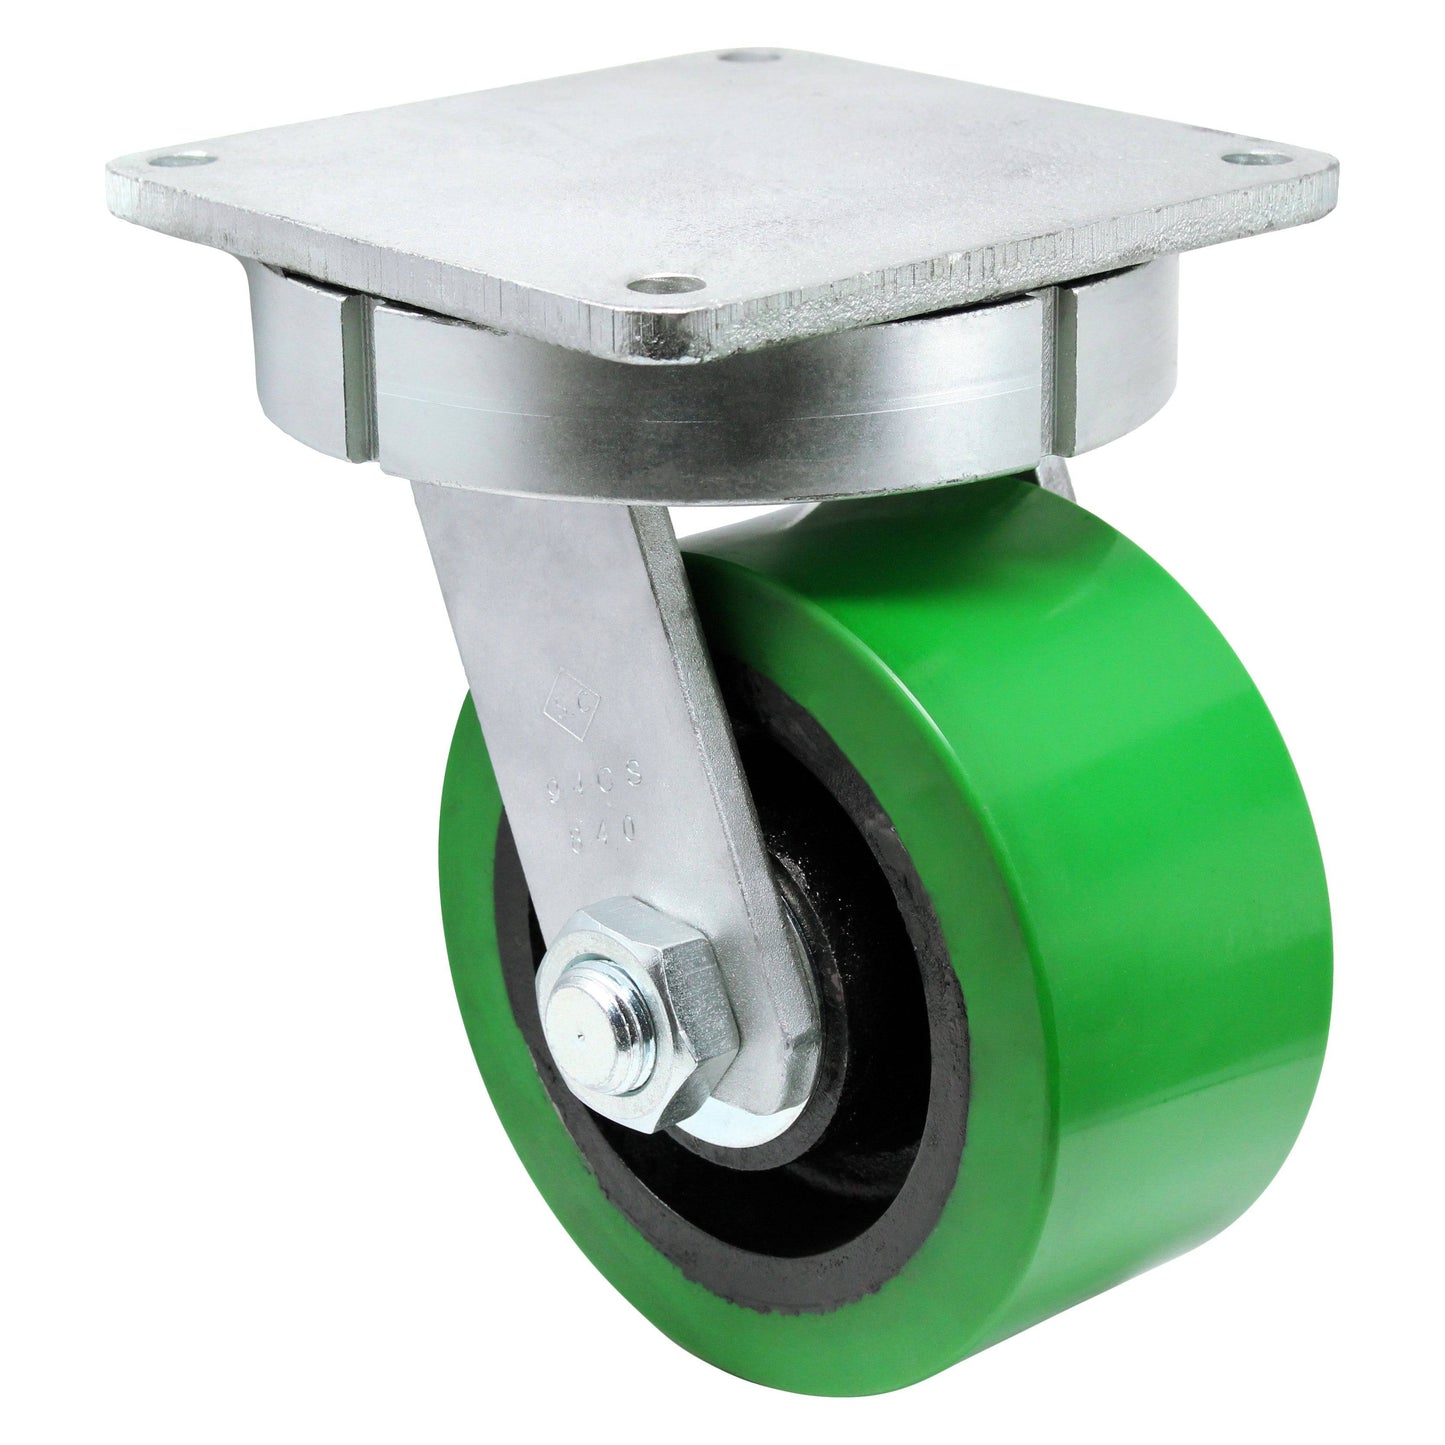 8" x 4" Ultra Poly Swivel Caster - 4000 lbs. capacity - Durable Superior Casters